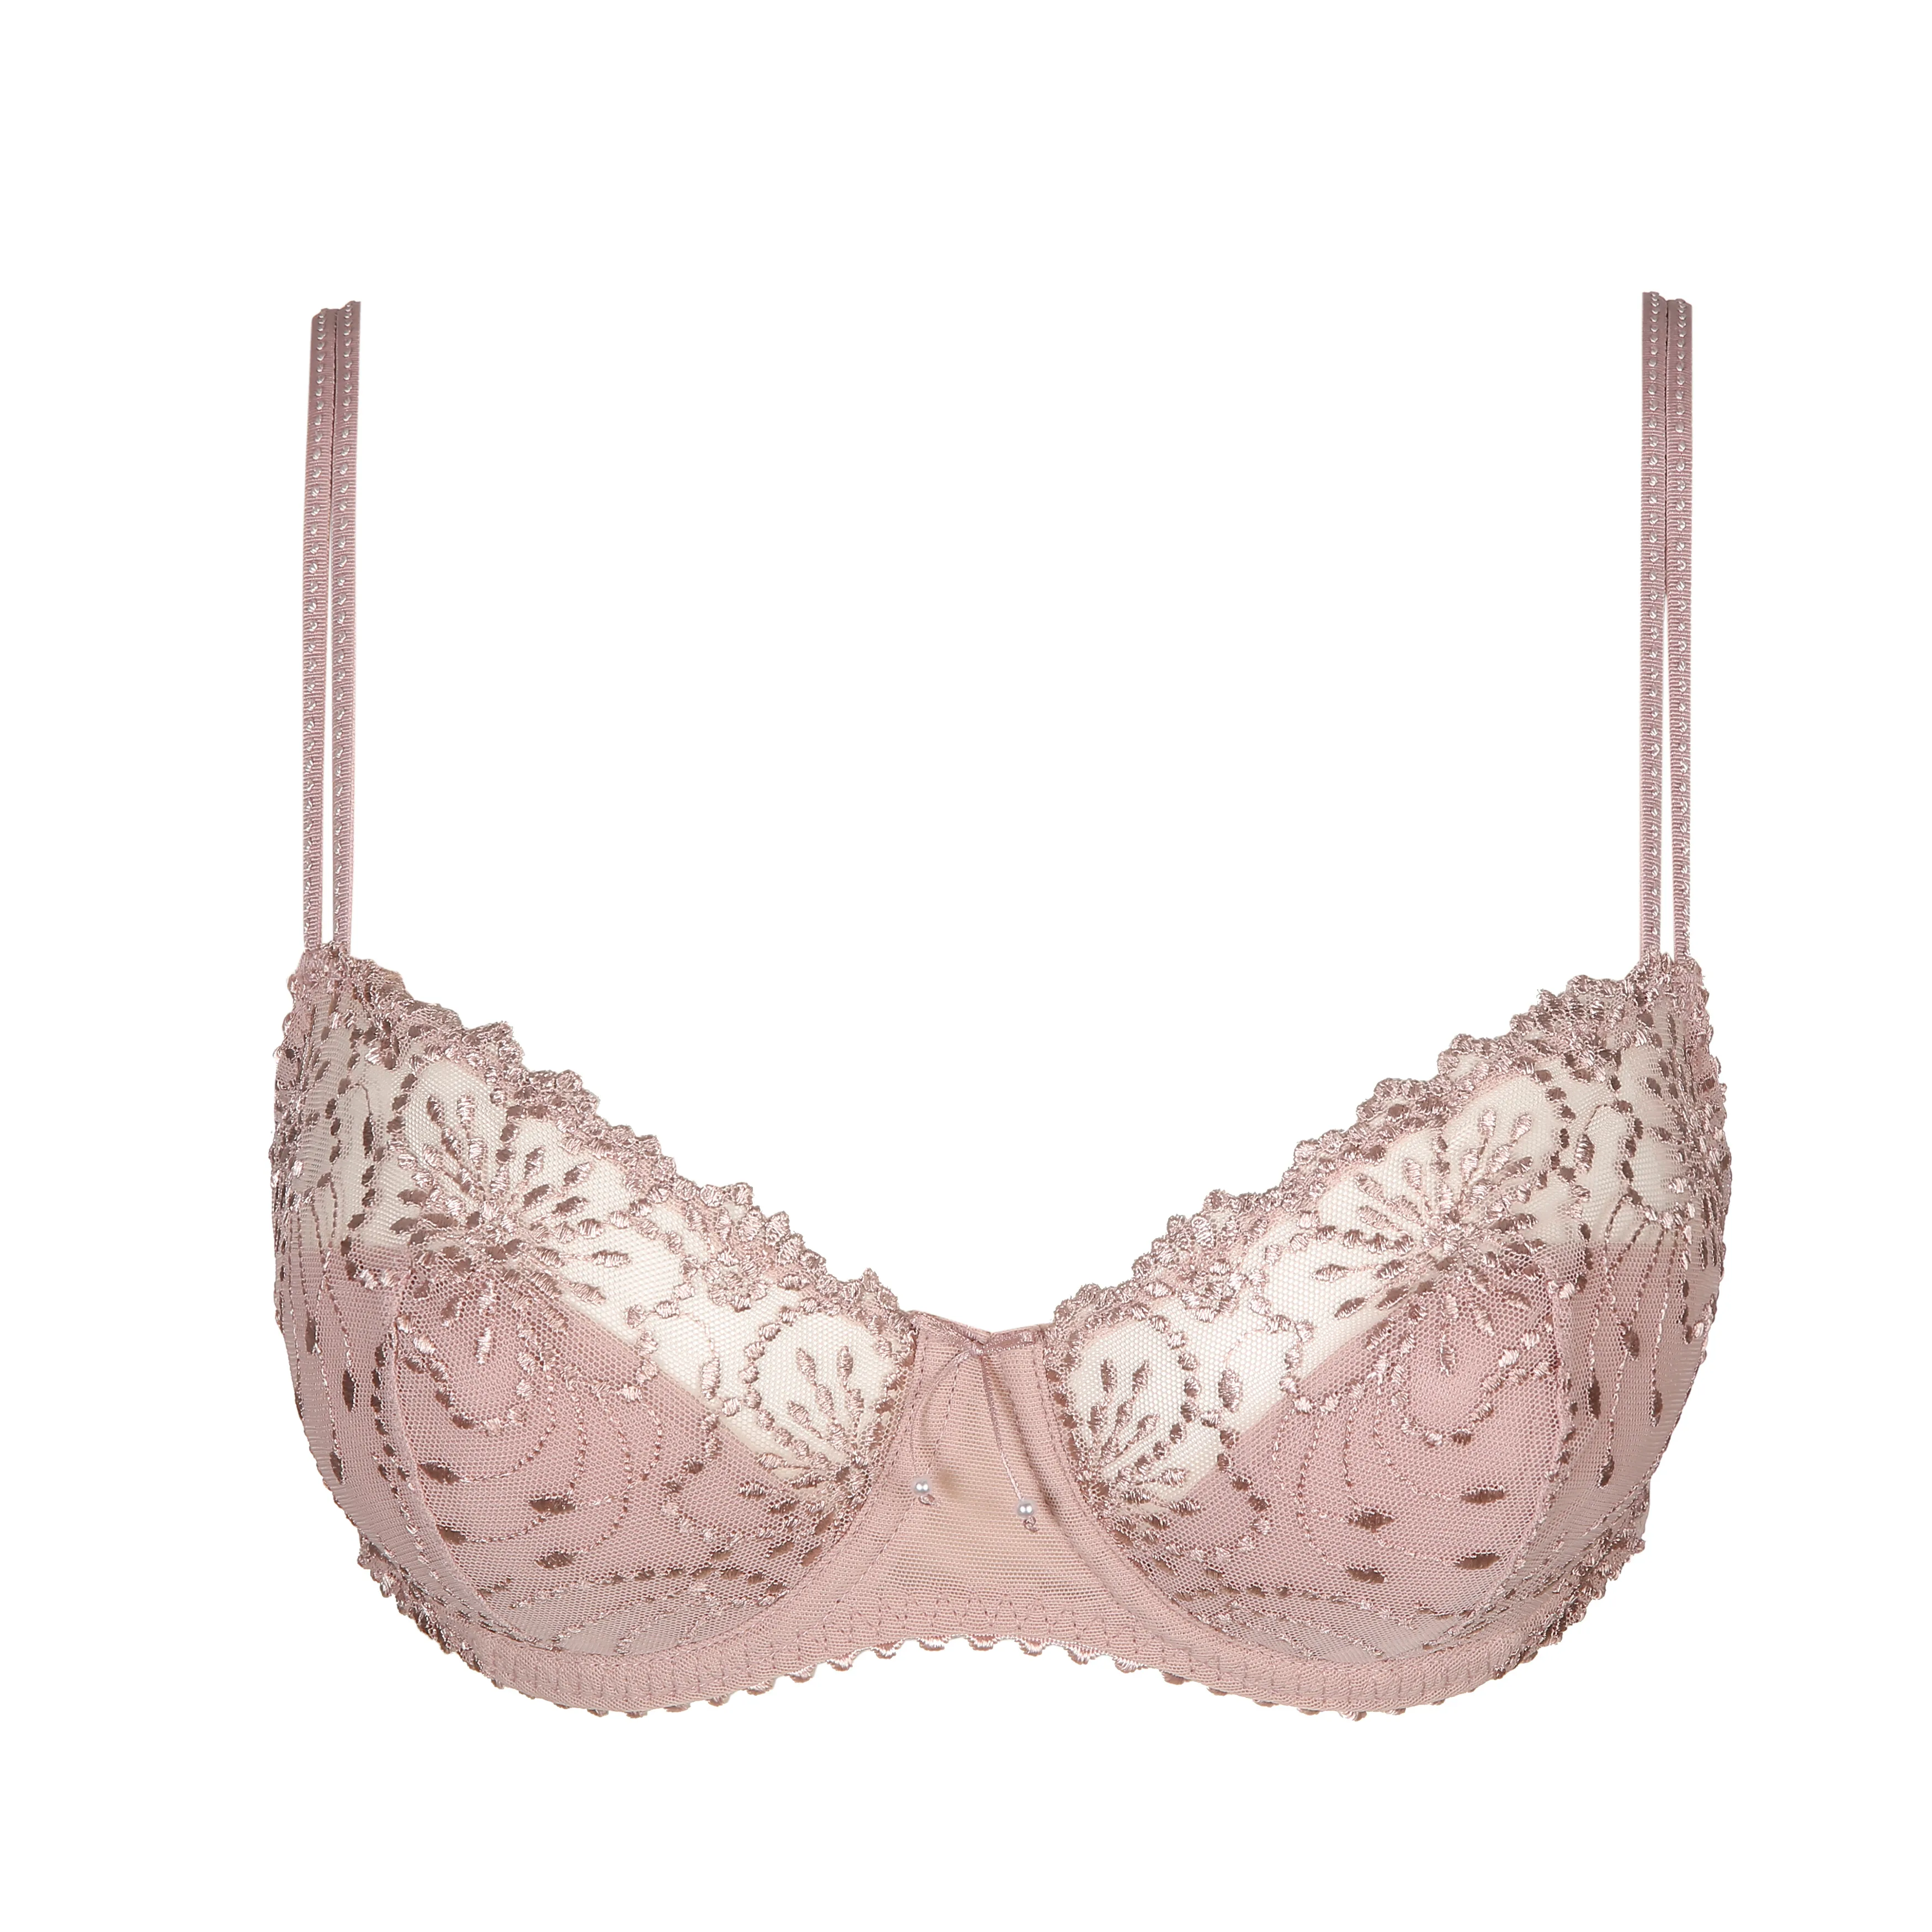 Padded bra - Balcony Coely Marie Jo couleur Smokey Strawberry kiss tailles  85 90 95 100 105 80